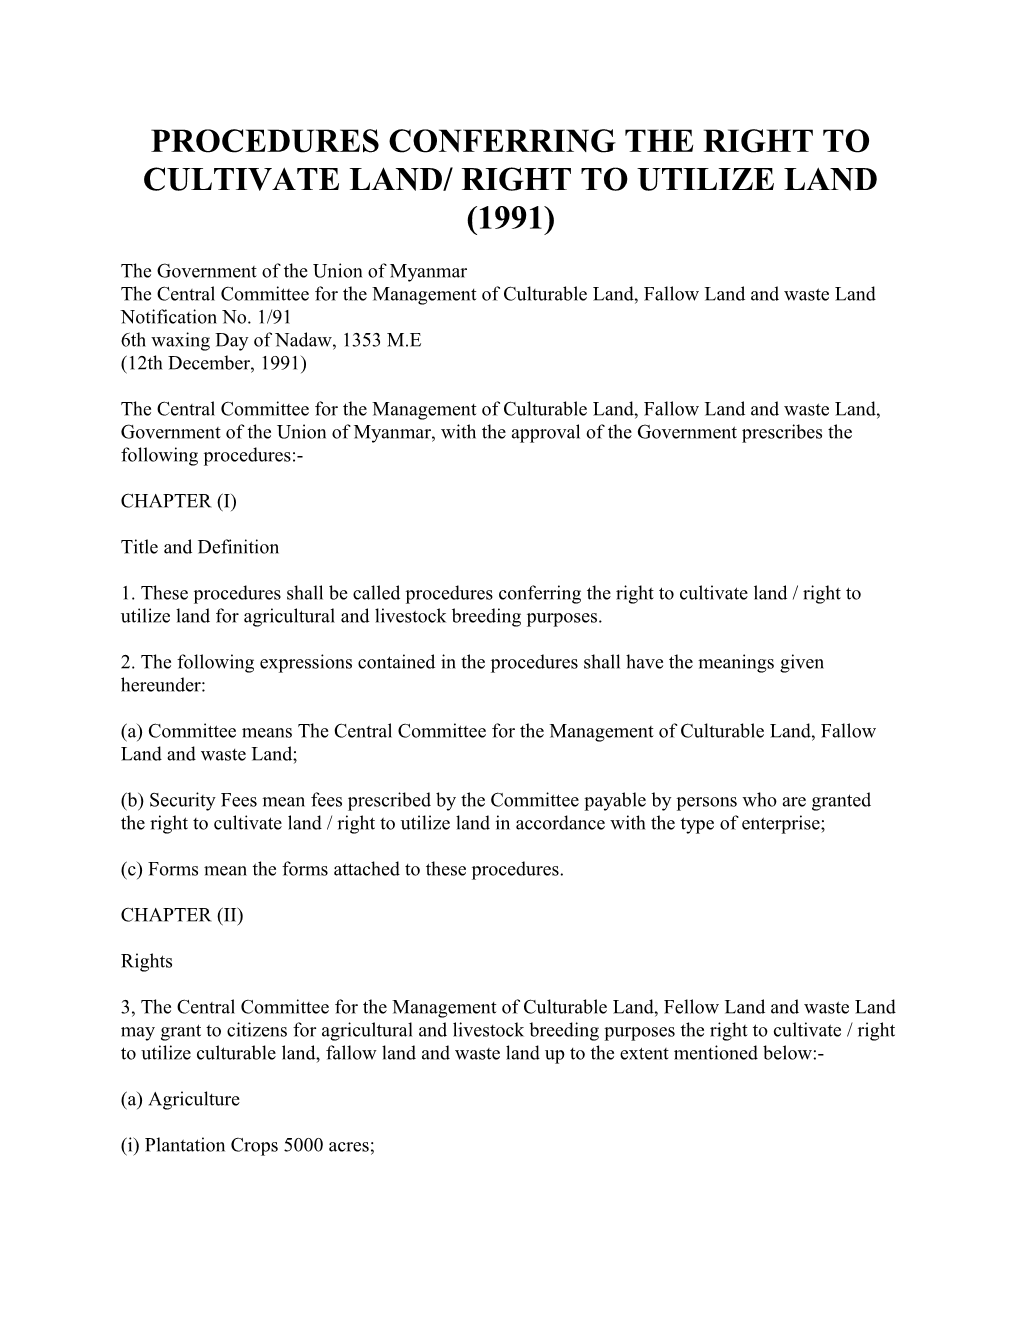 Procedures Conferring the Right to Cultivate Land/ Right to Utilize Land (1991)